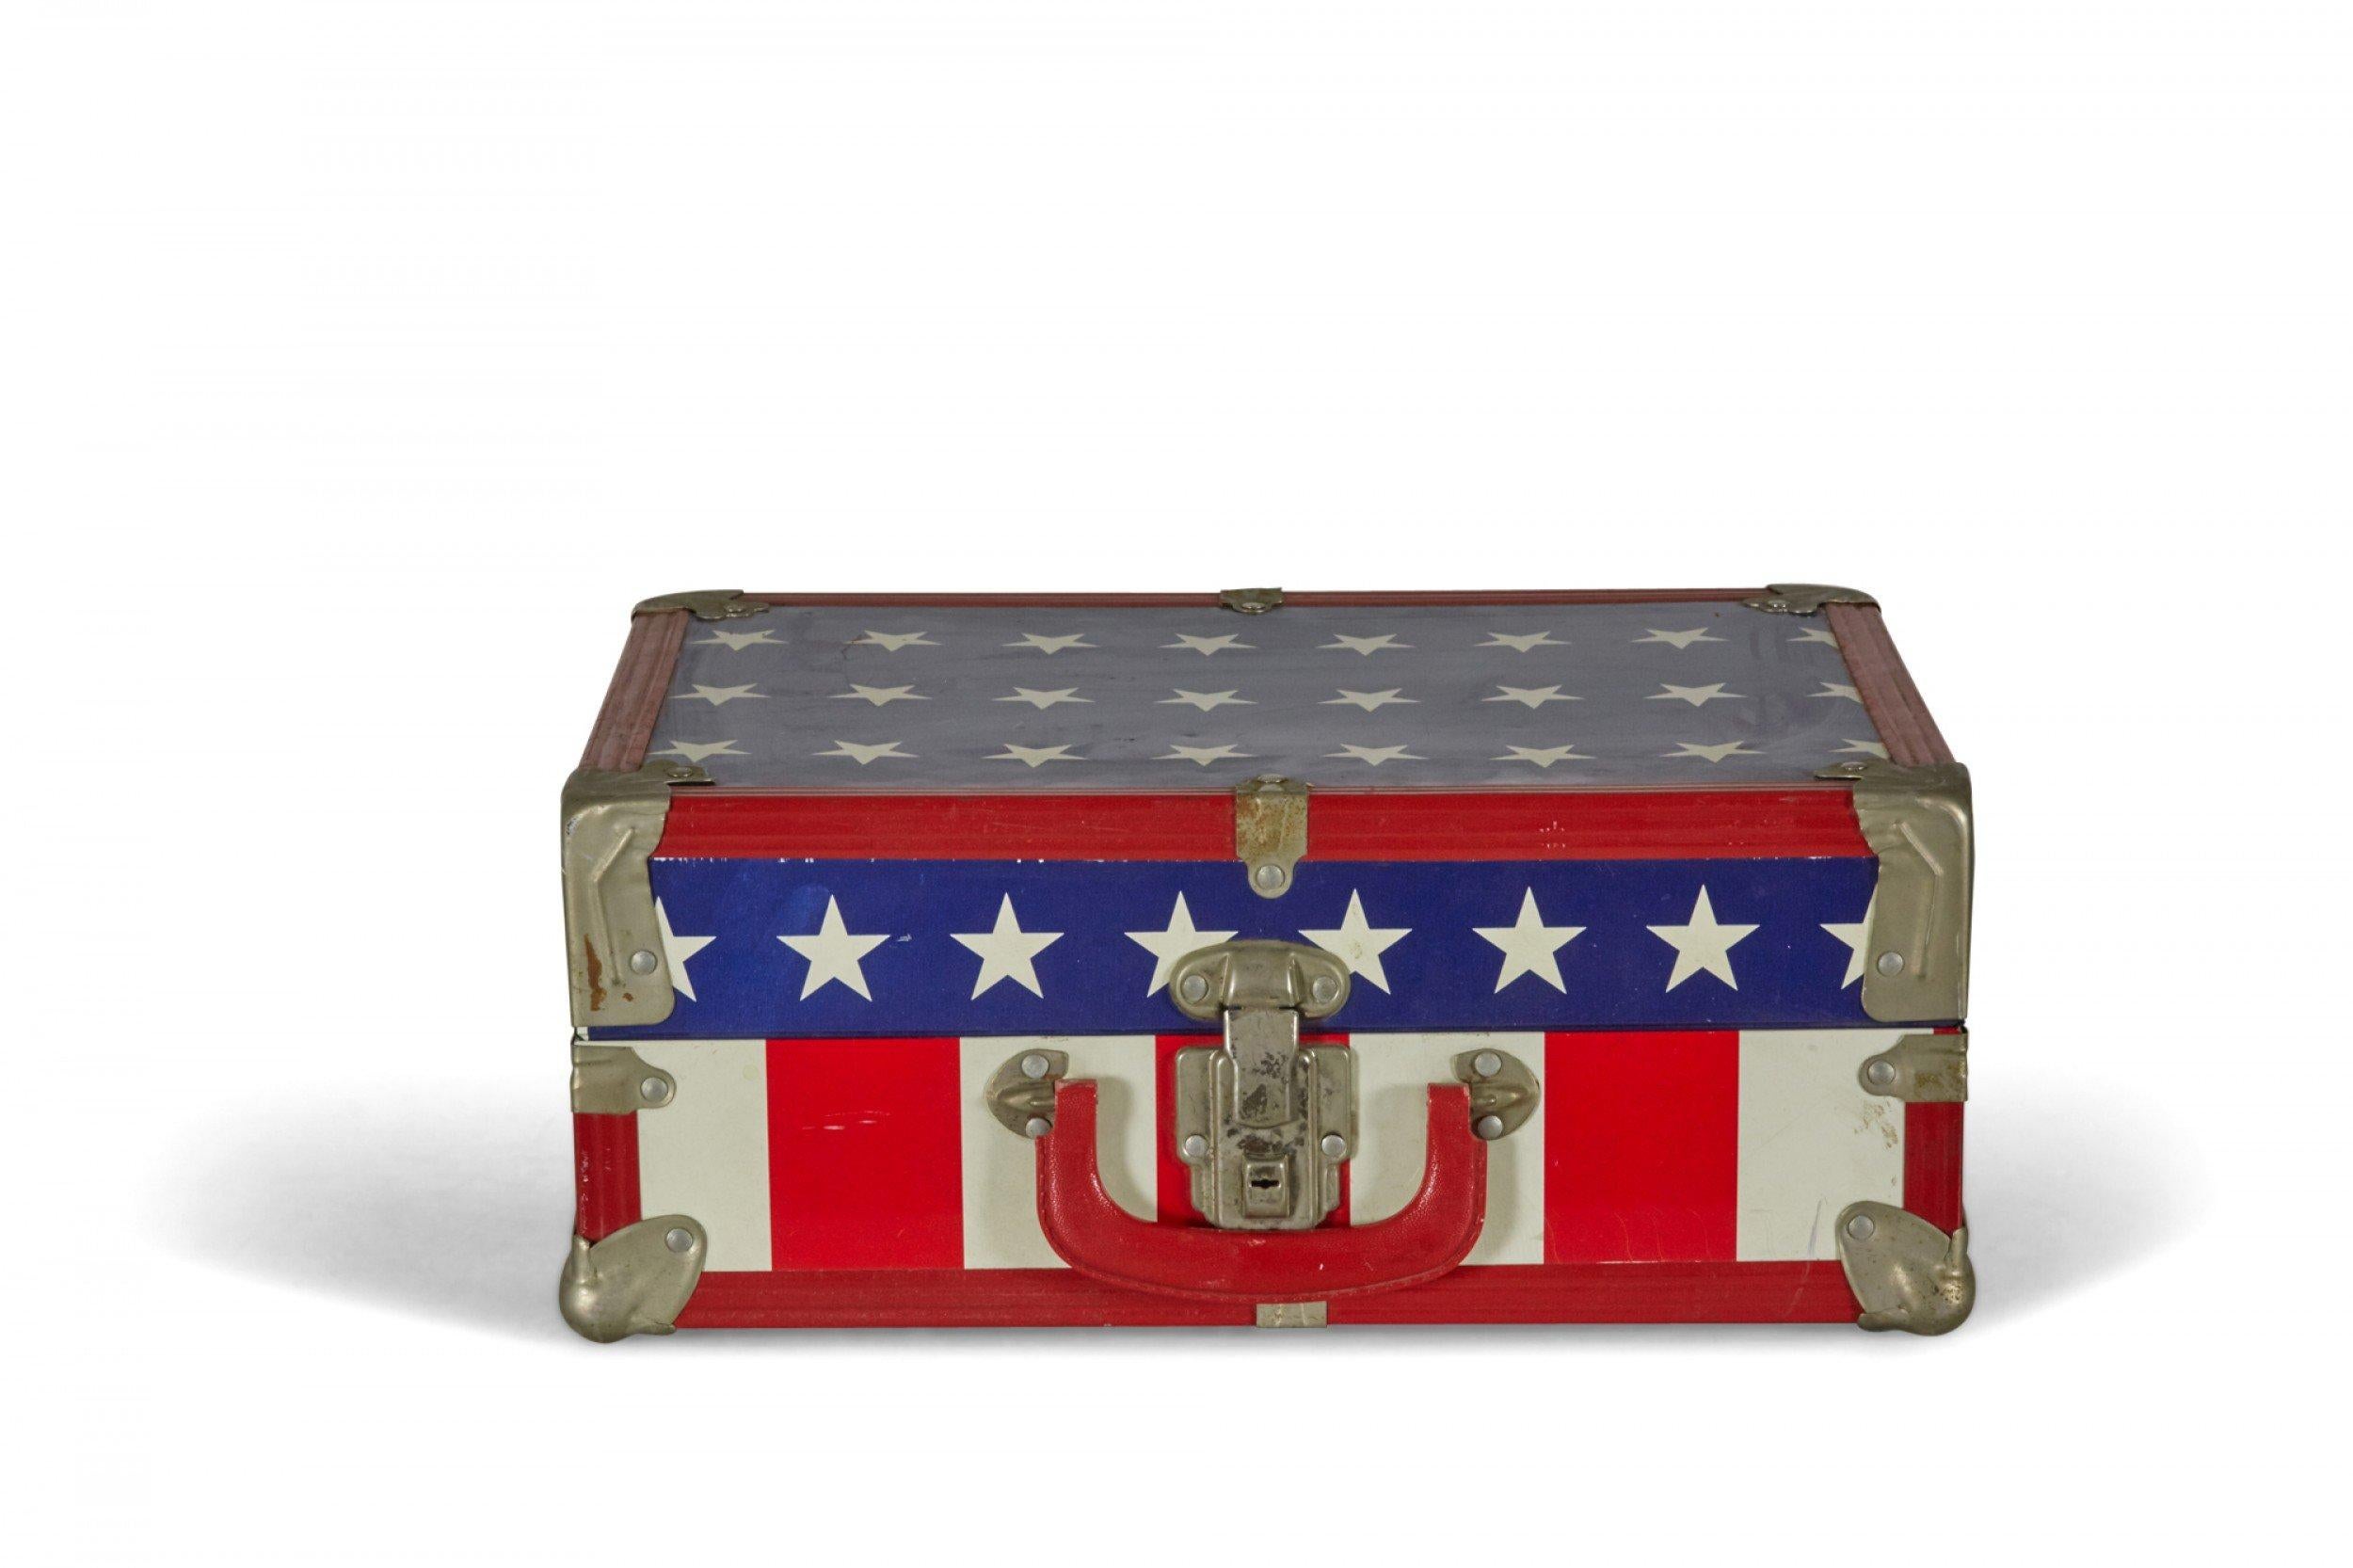 American Mid-Century child-sized suitcase with an American flag motif, silver metal corners and latch, and a newspapered interior.